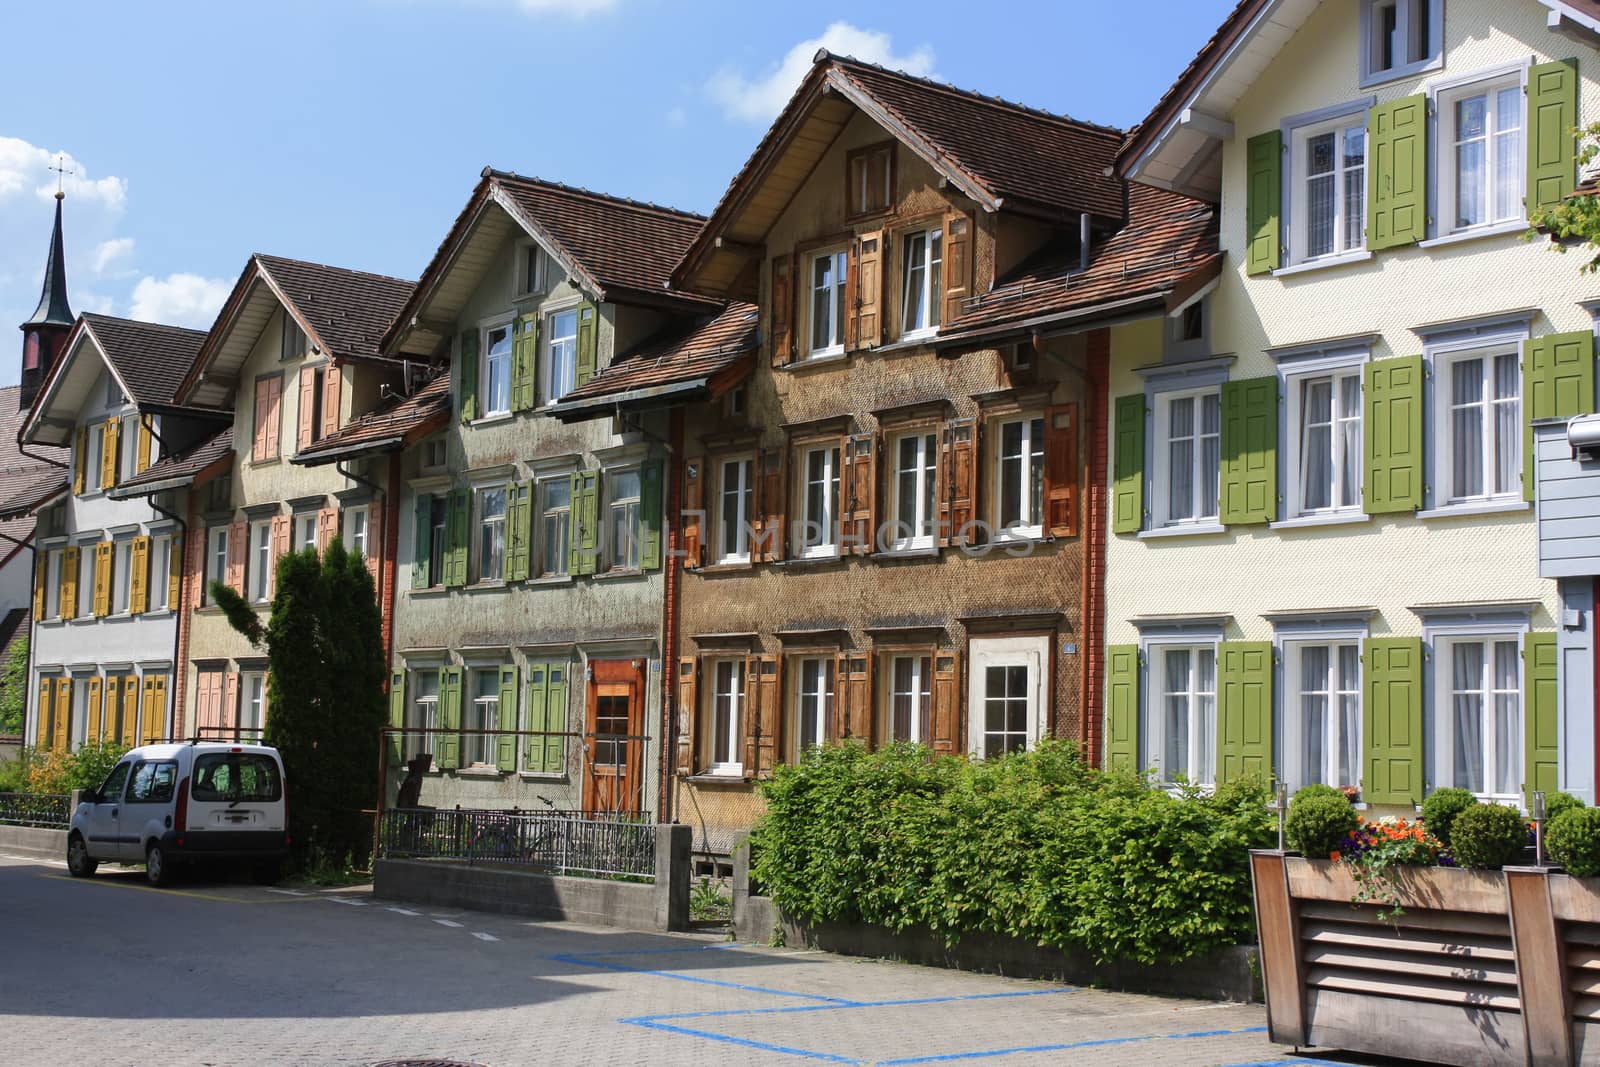 Wooden houses in the local style in Appenzel city